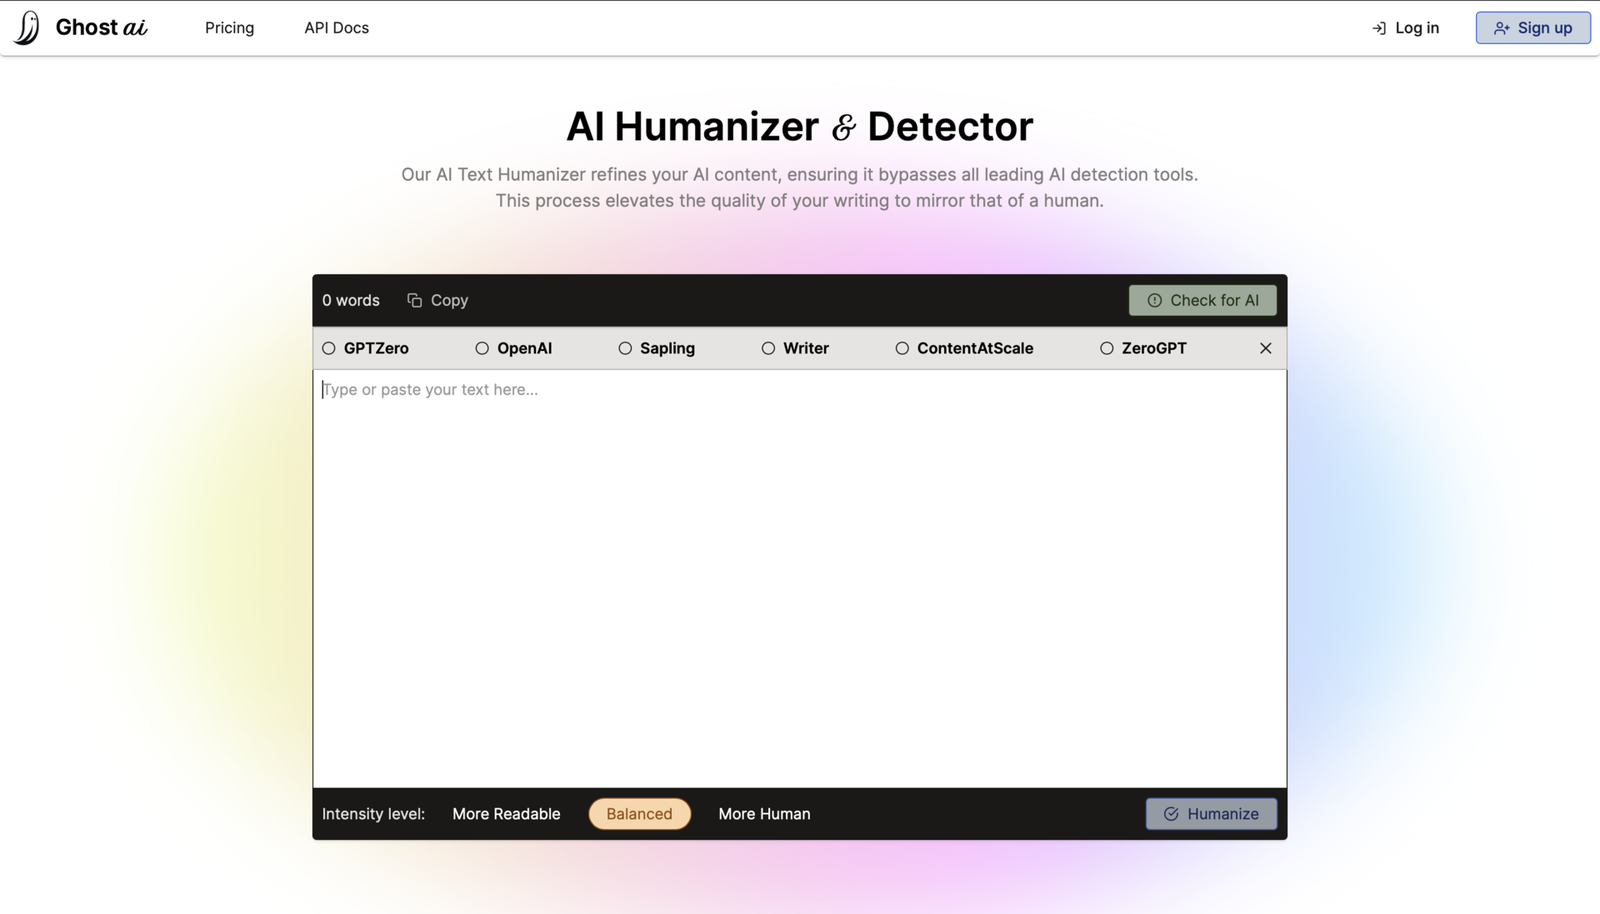 Ghost AI have launched their new AI humanizer that enables users to create AI generated content that passes as human on detectors.